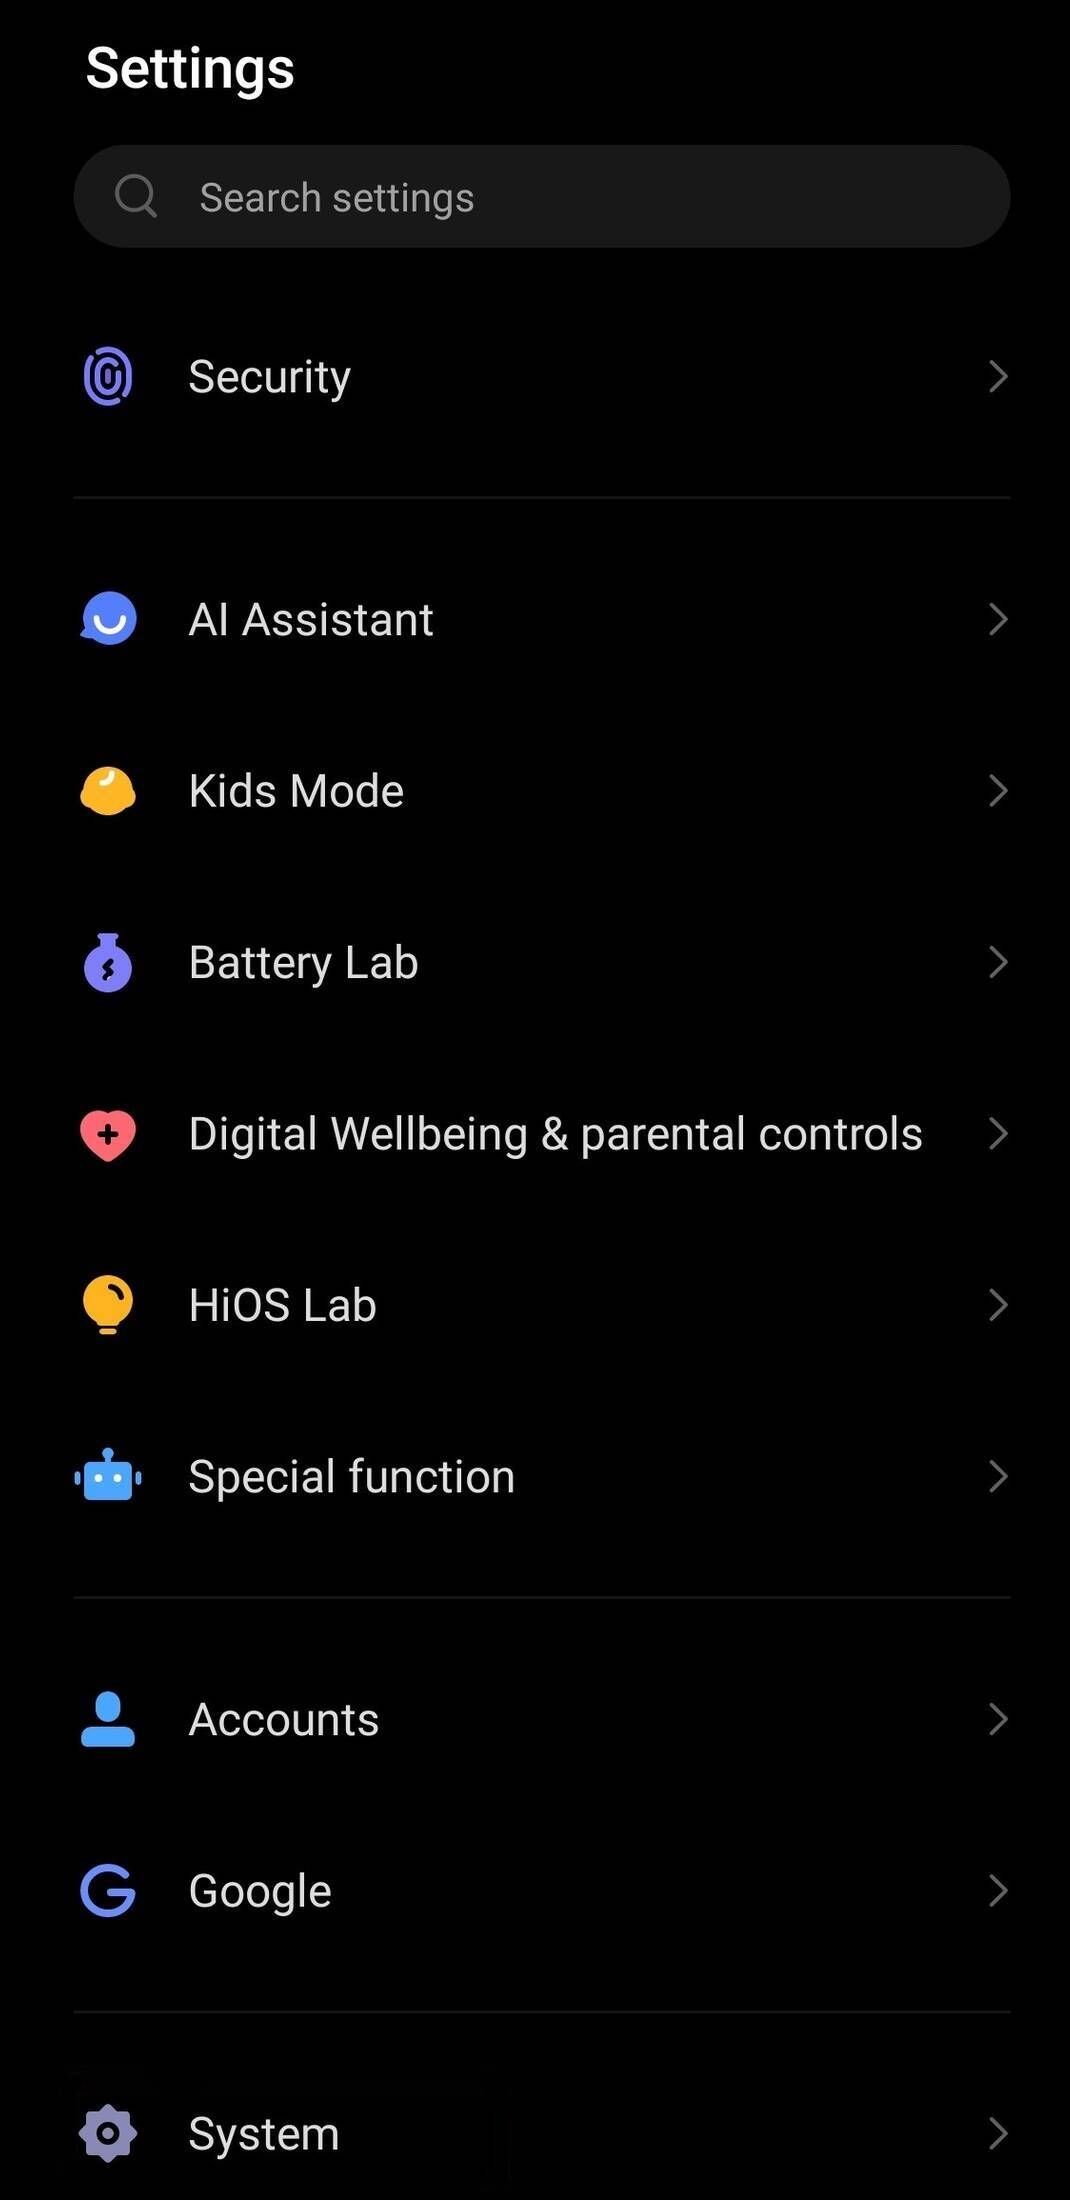 Settings menu showing System and other options